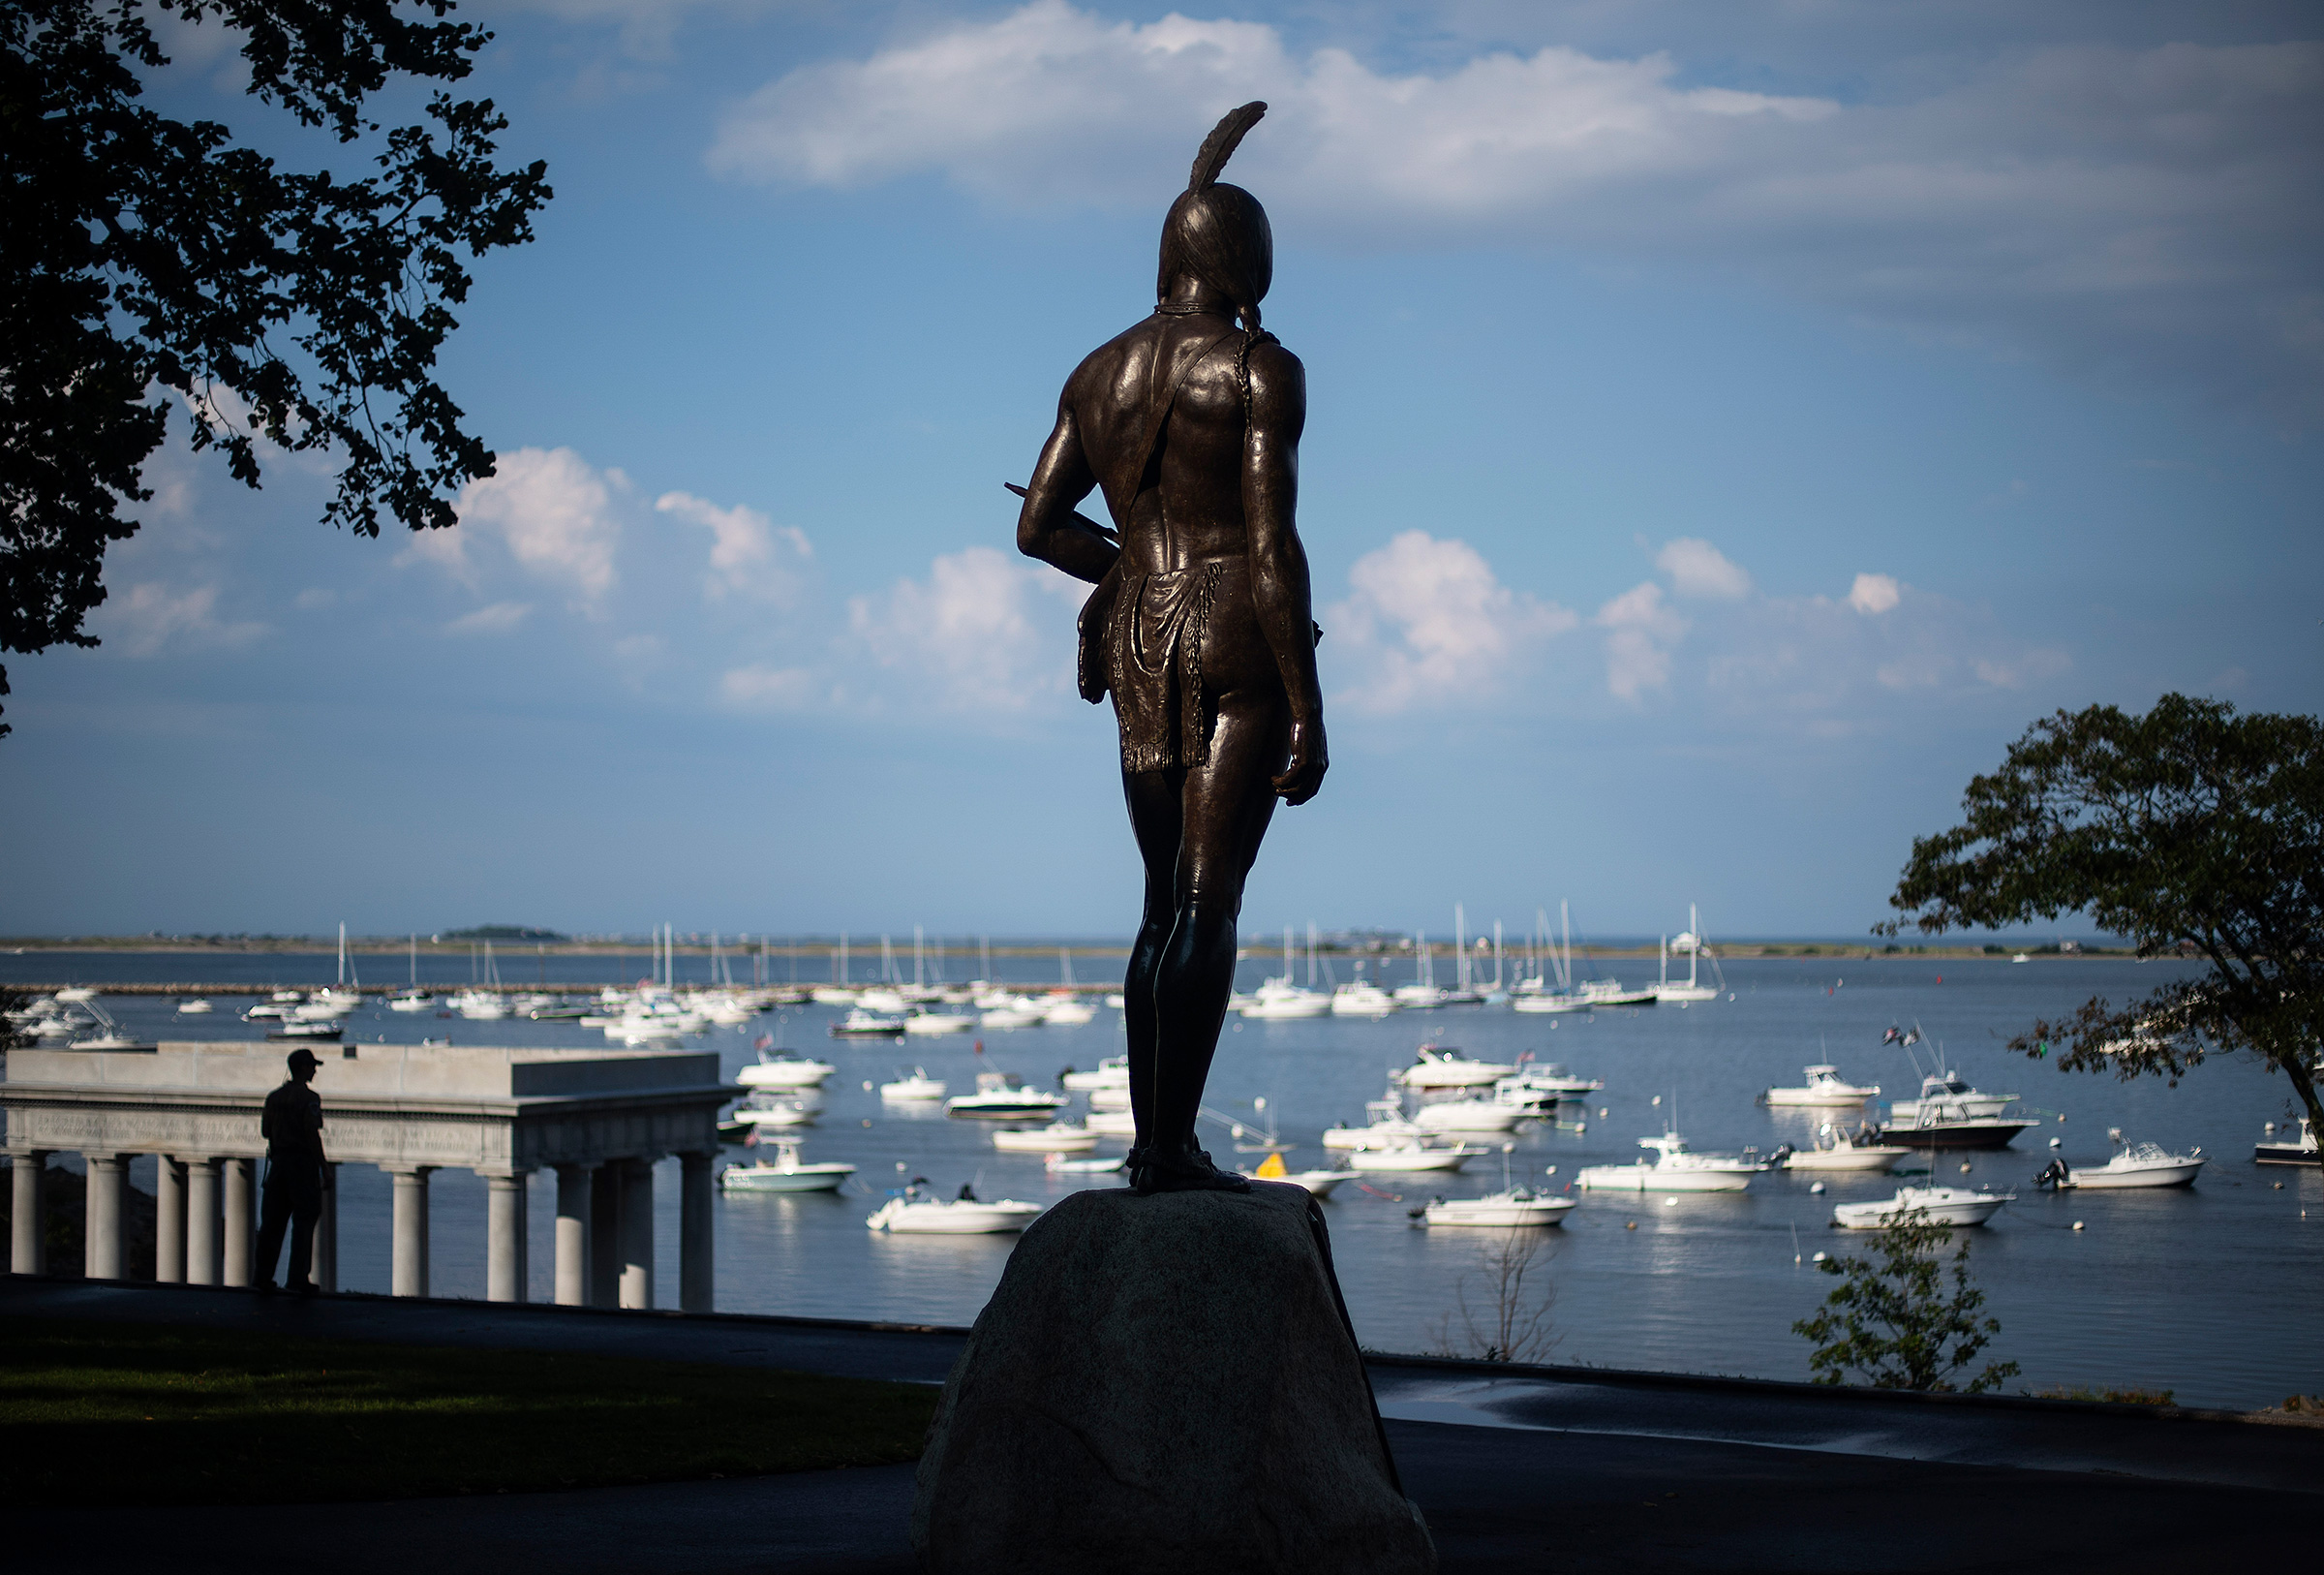 A statue of the Native American leader Massasoit looks out over the traditional point of arrival of the Pilgrims on the Mayflower in 1620, in Plymouth, Mass., Aug. 12, 2020. (David Goldman—AP)